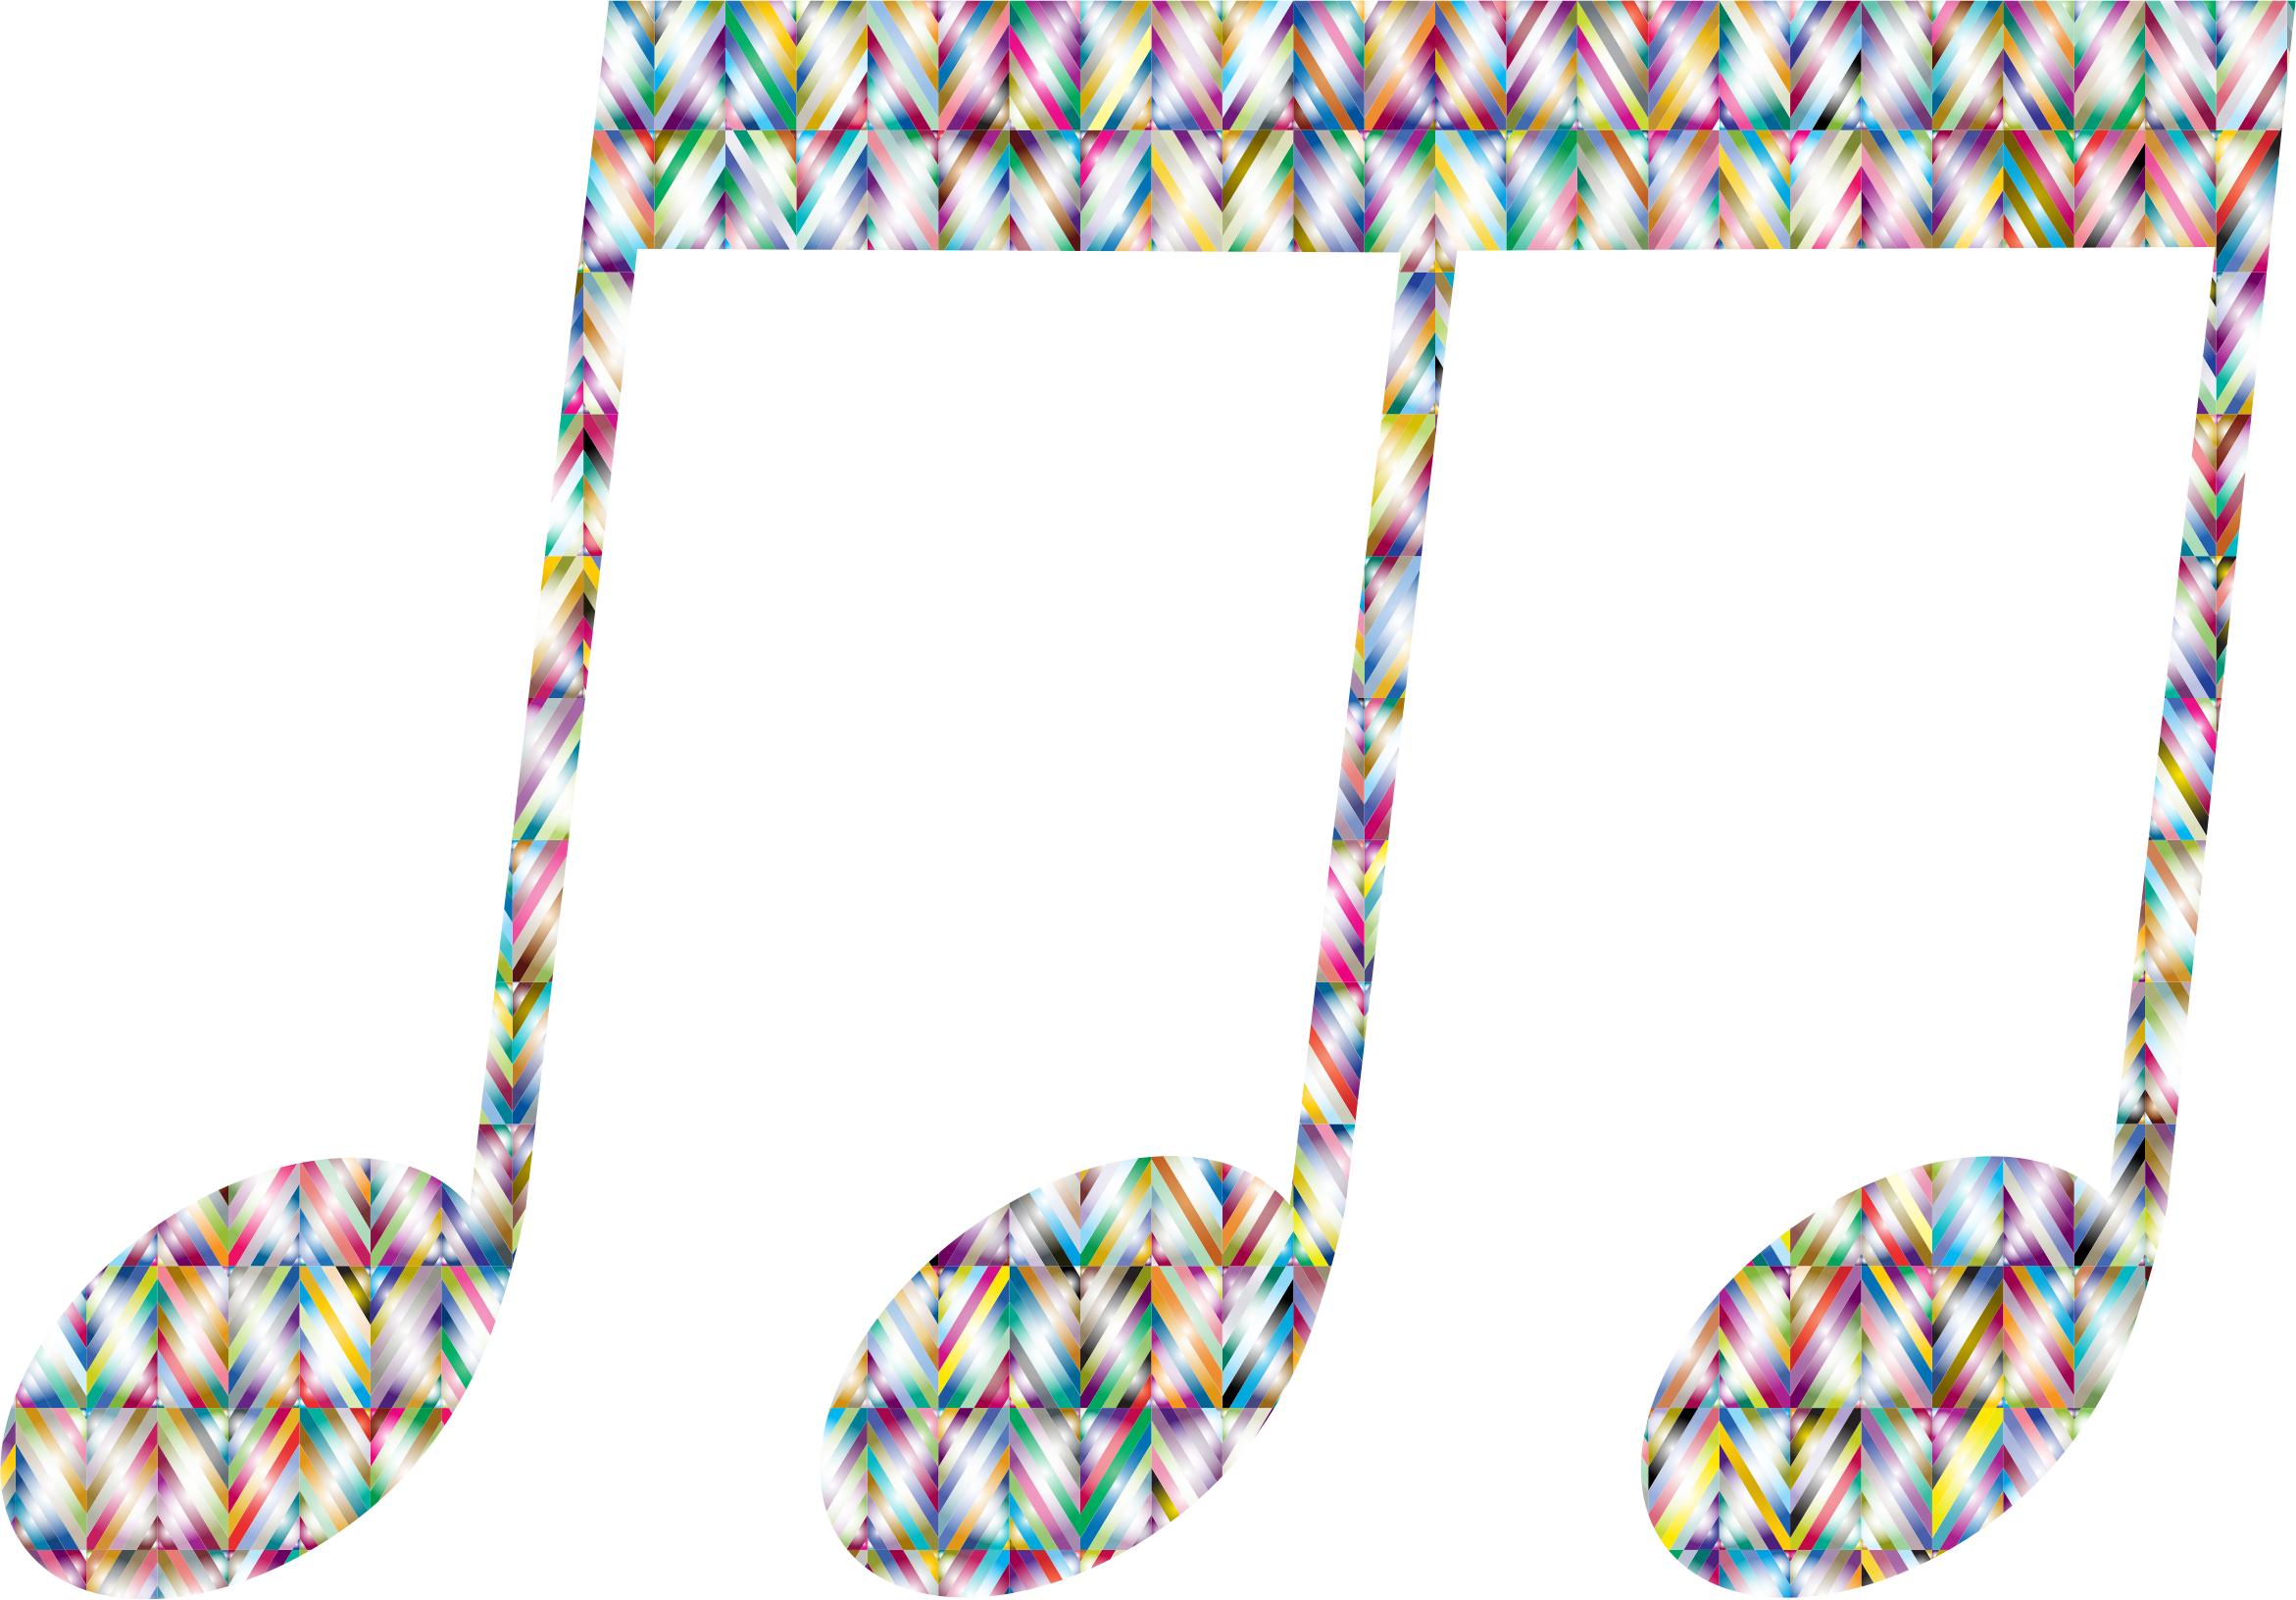 Prismatic Strips Musical Note 3 png